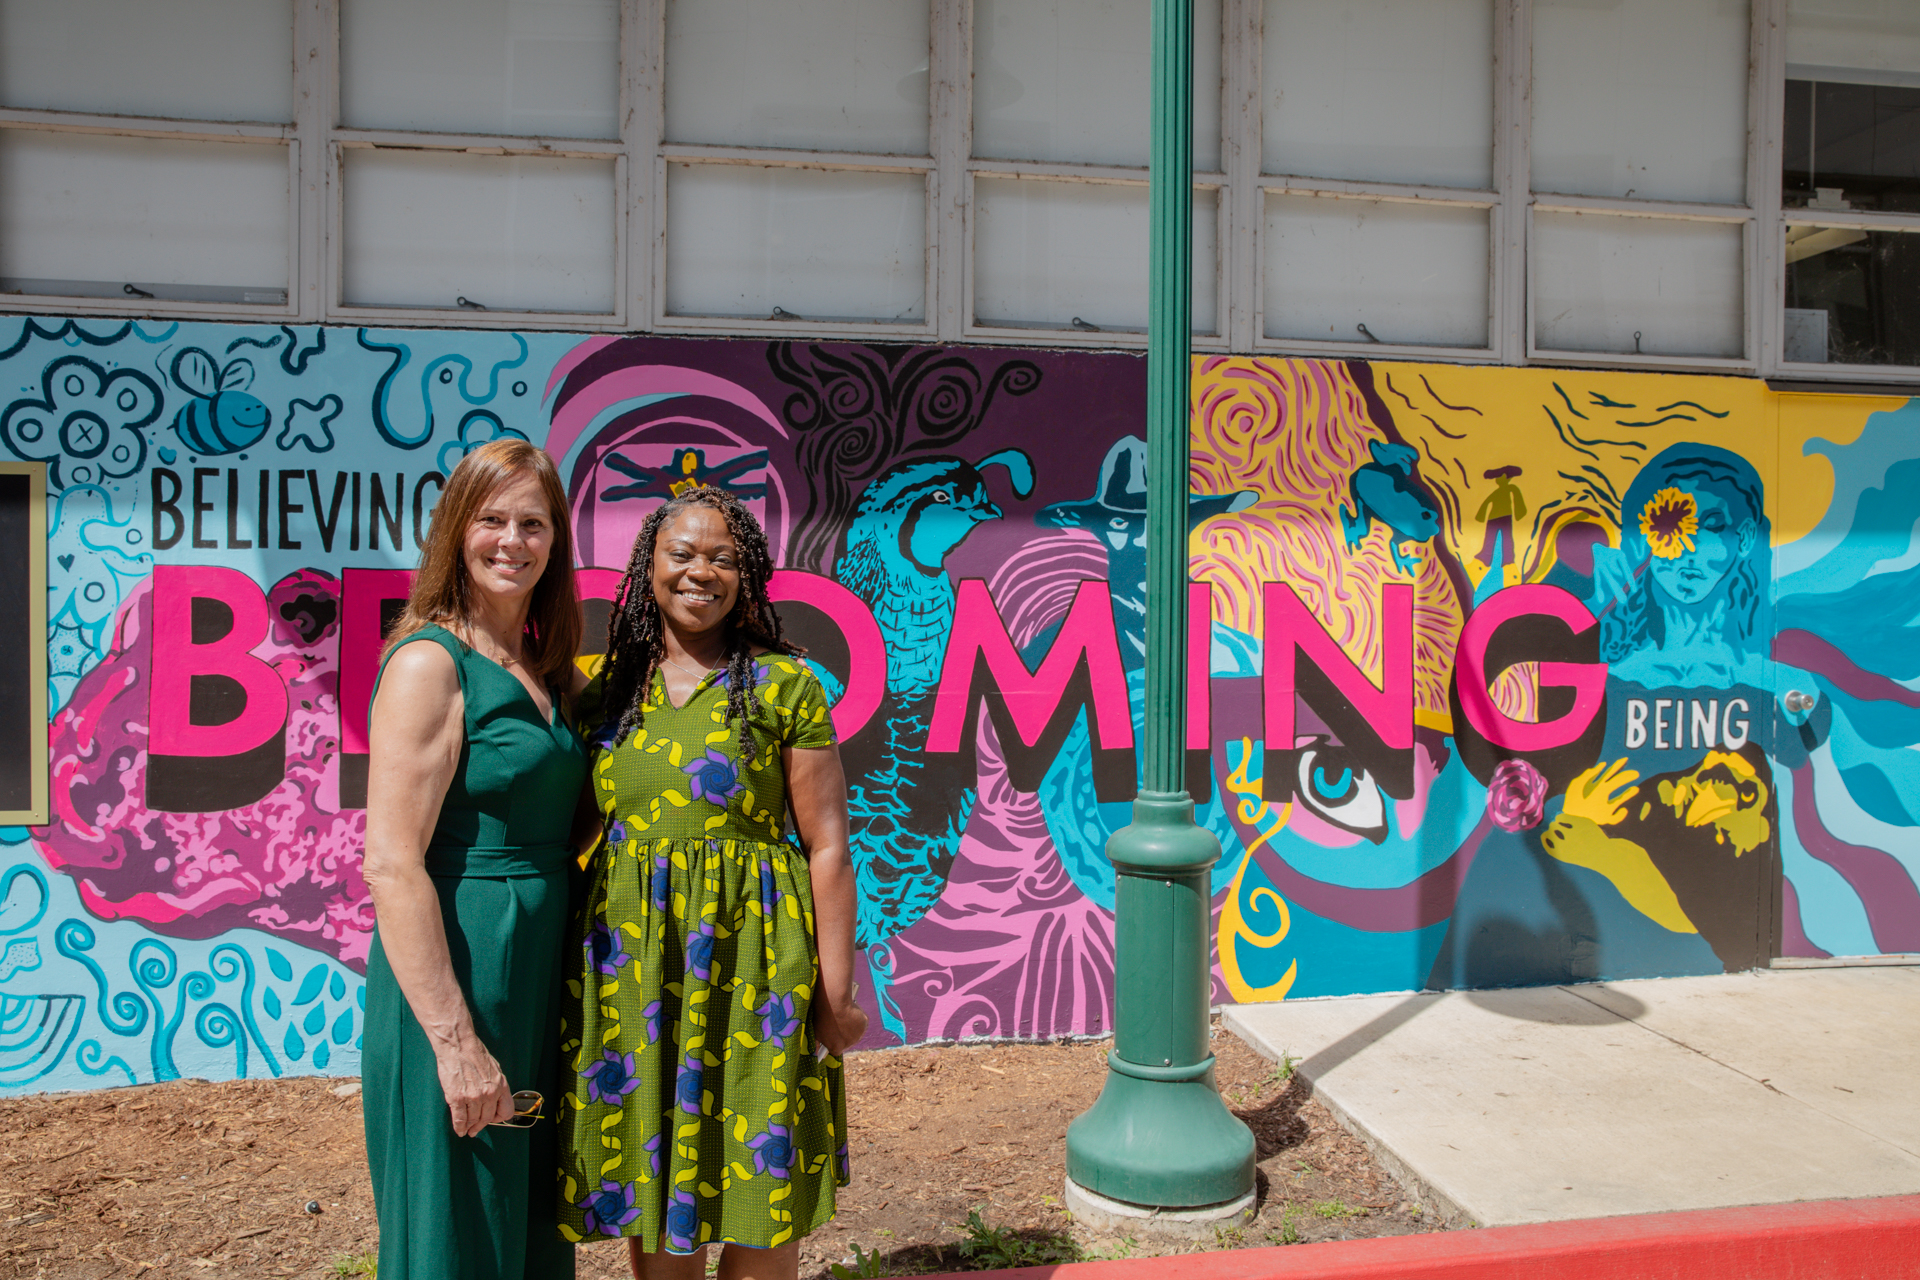 Campus staff pose in front of one of the Becoming murals.